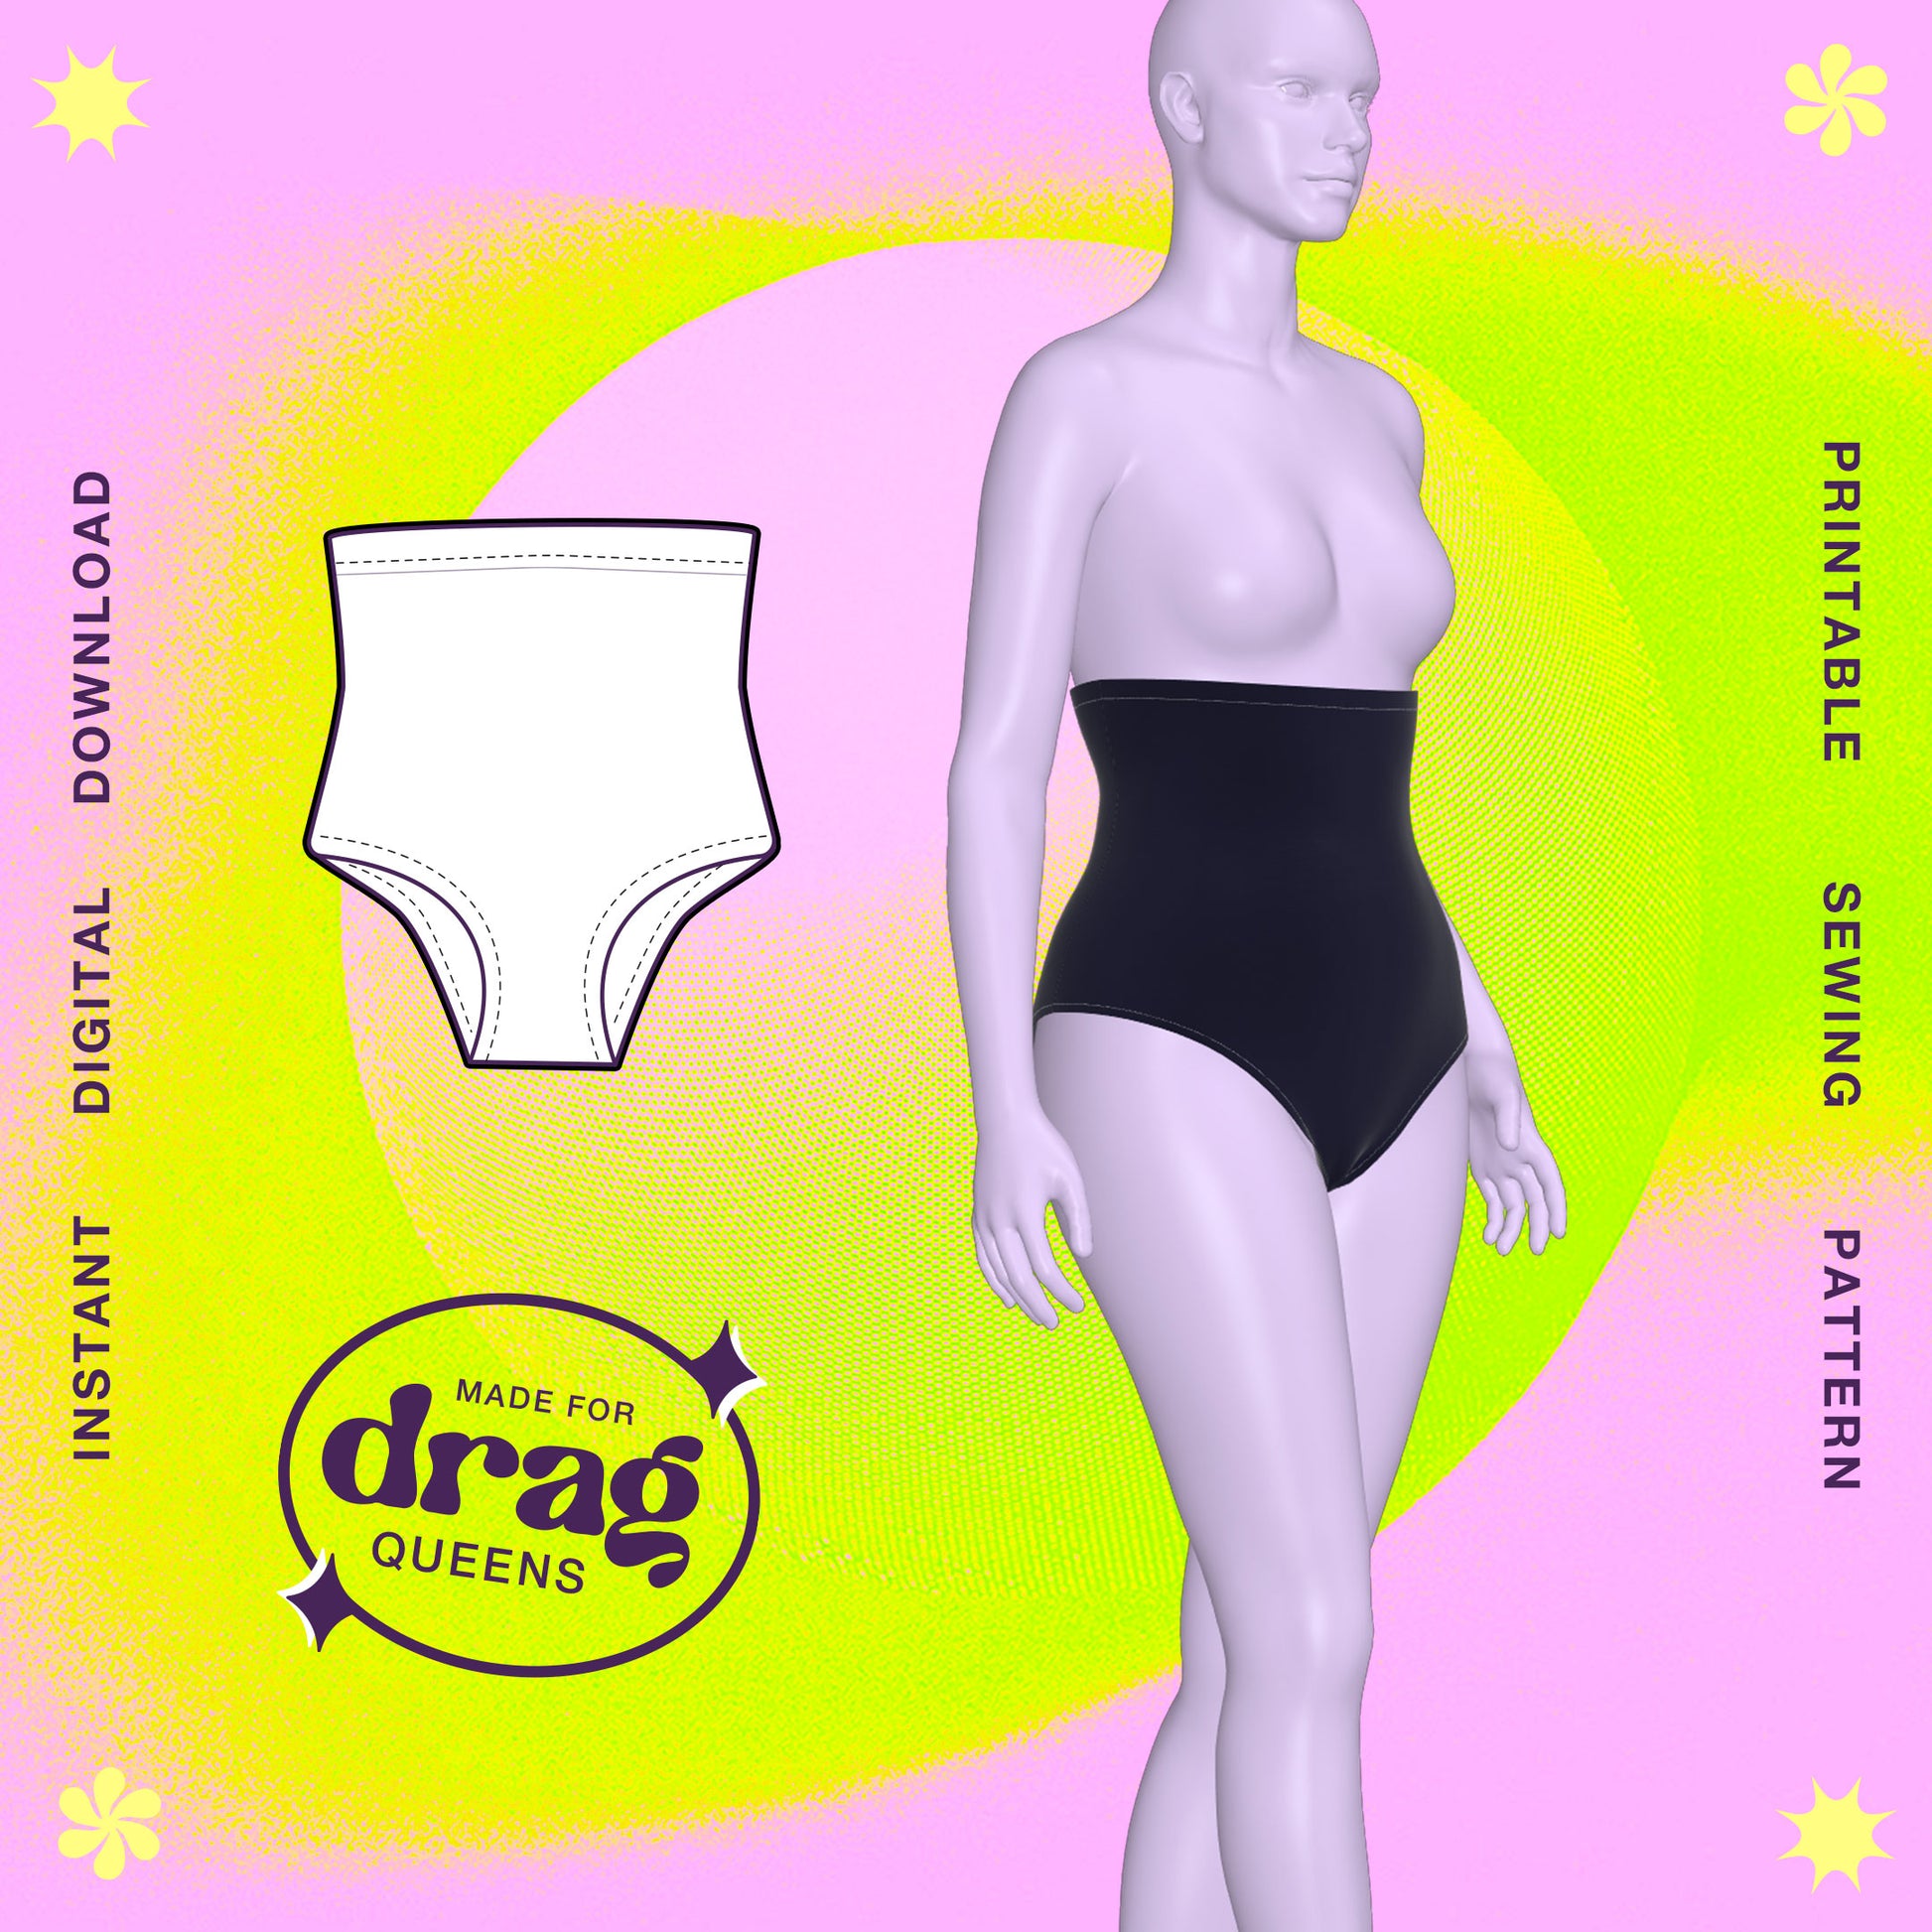 Katkow Drag Queen Waist Cover Undergarment Shapewear Sewing Pattern Thumb